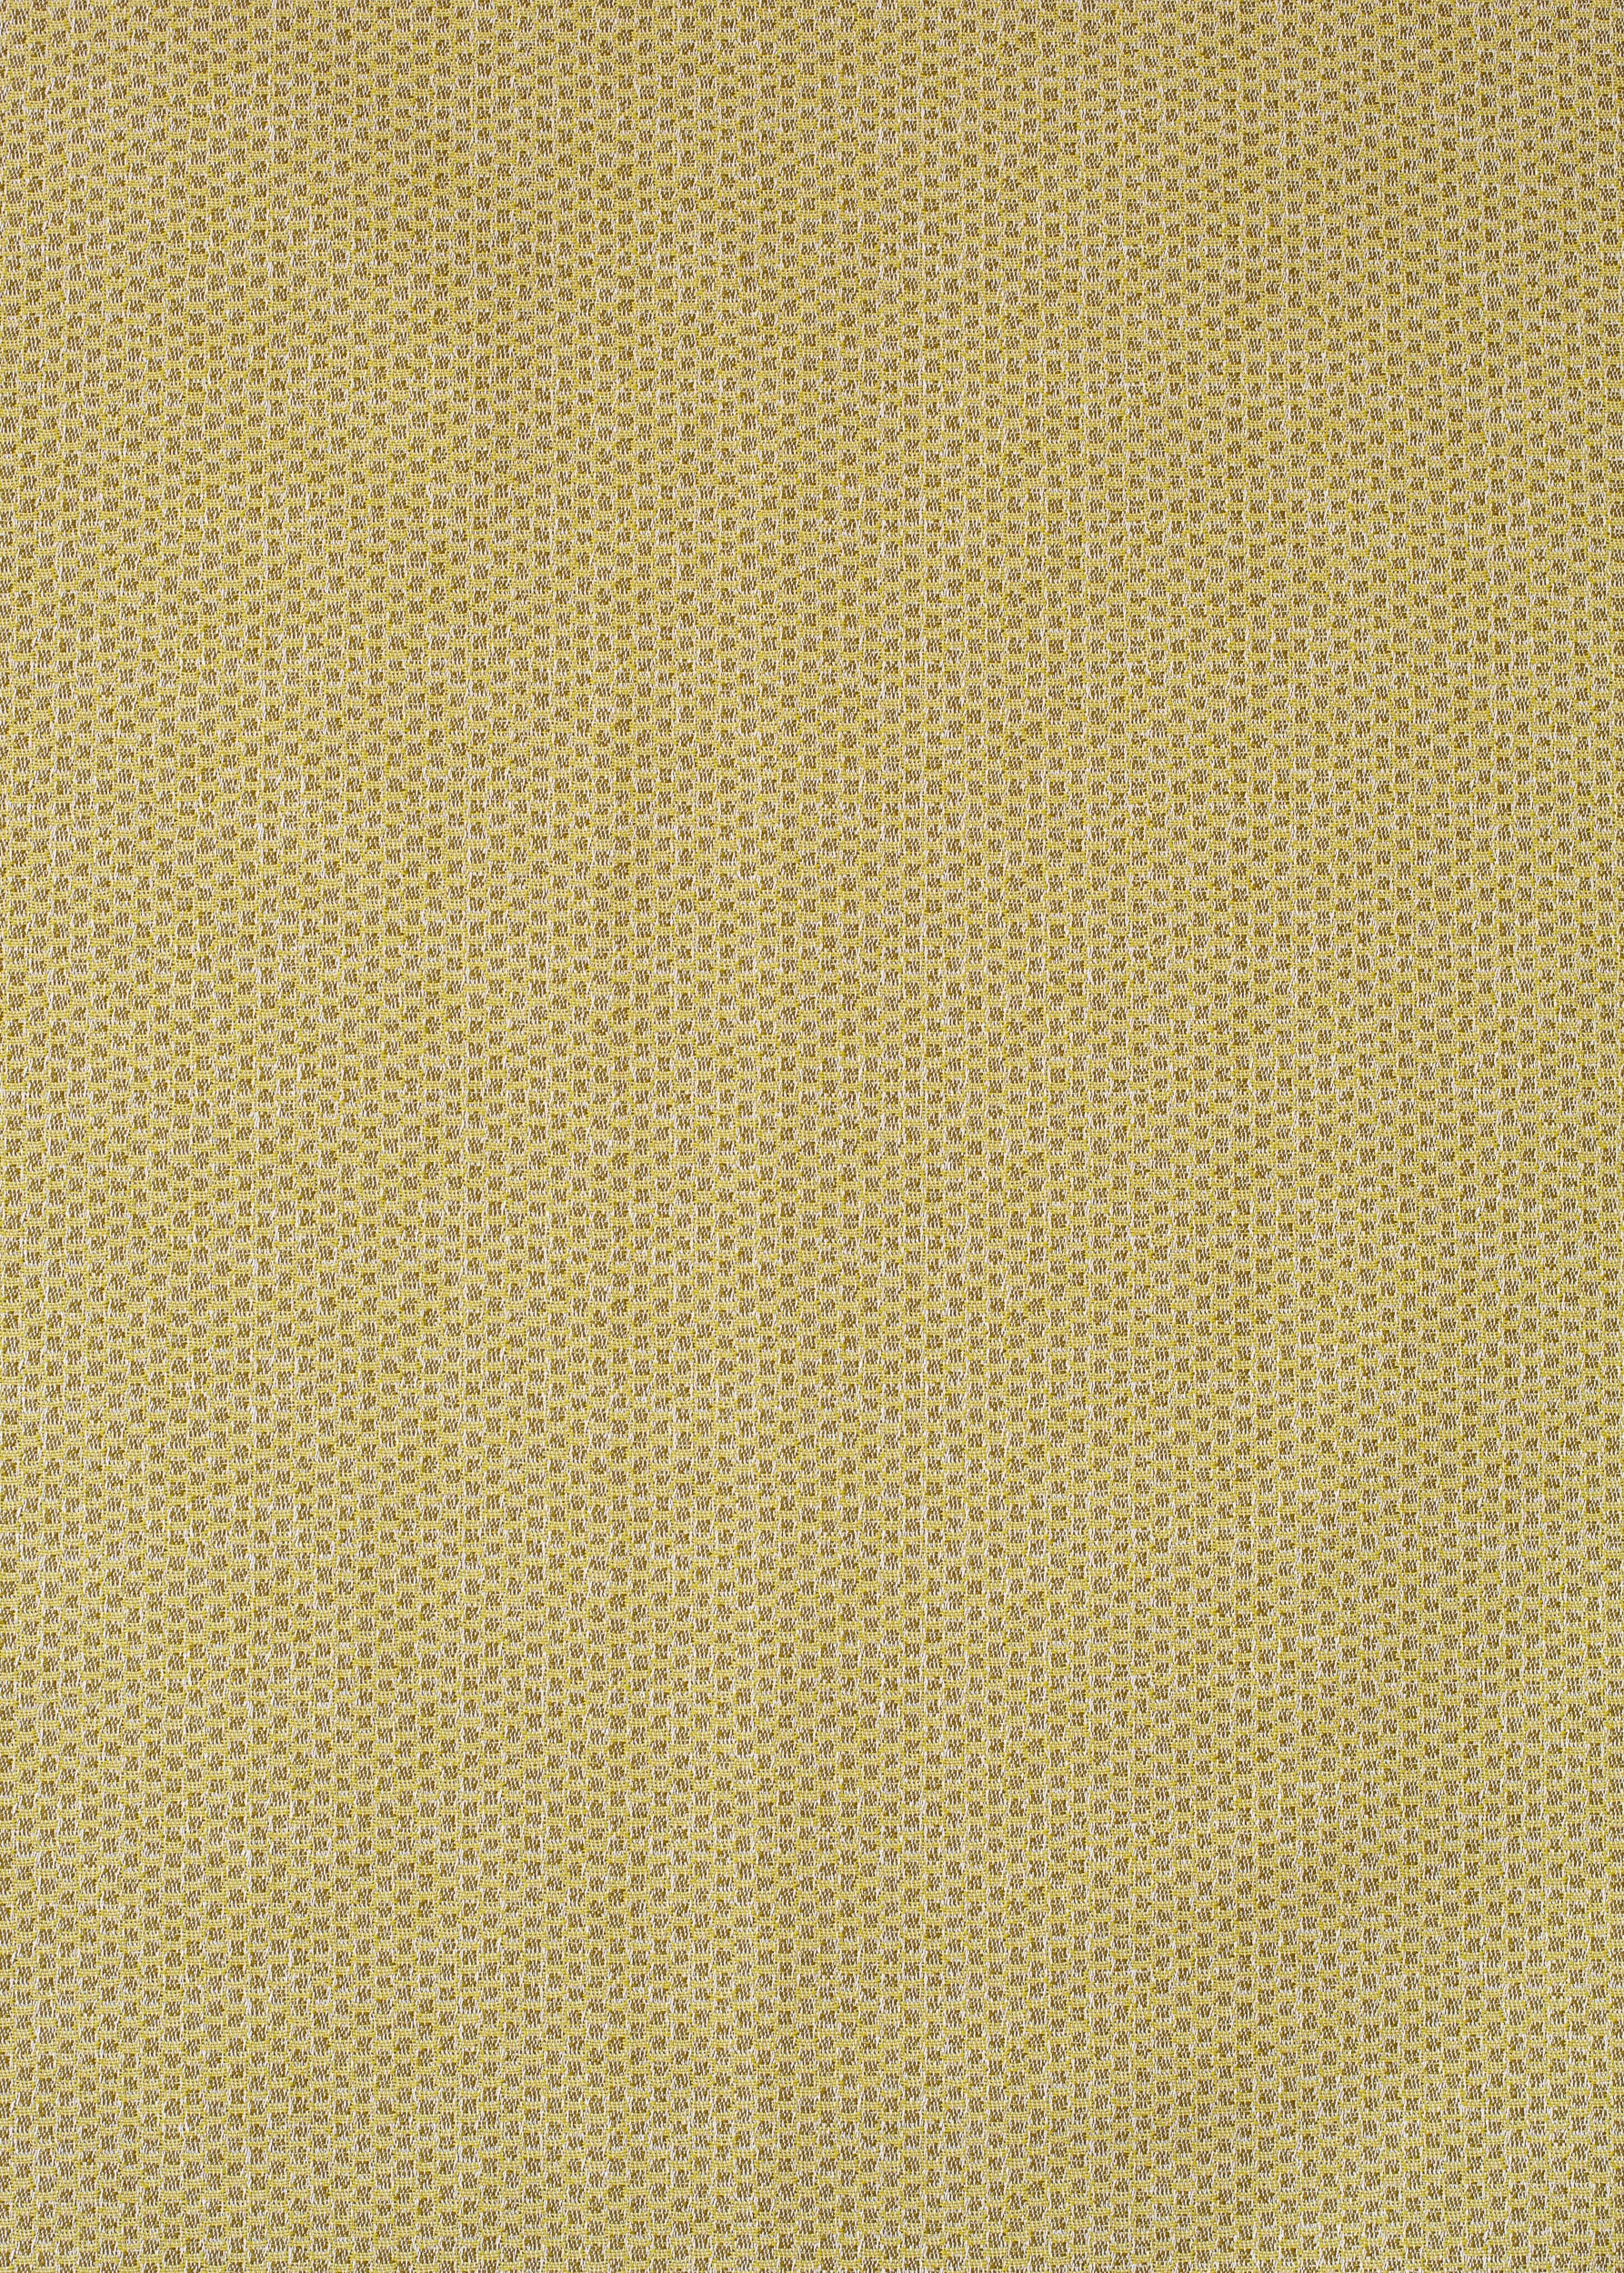 Square fabric swatch in a dense checked weave in gold and tan.